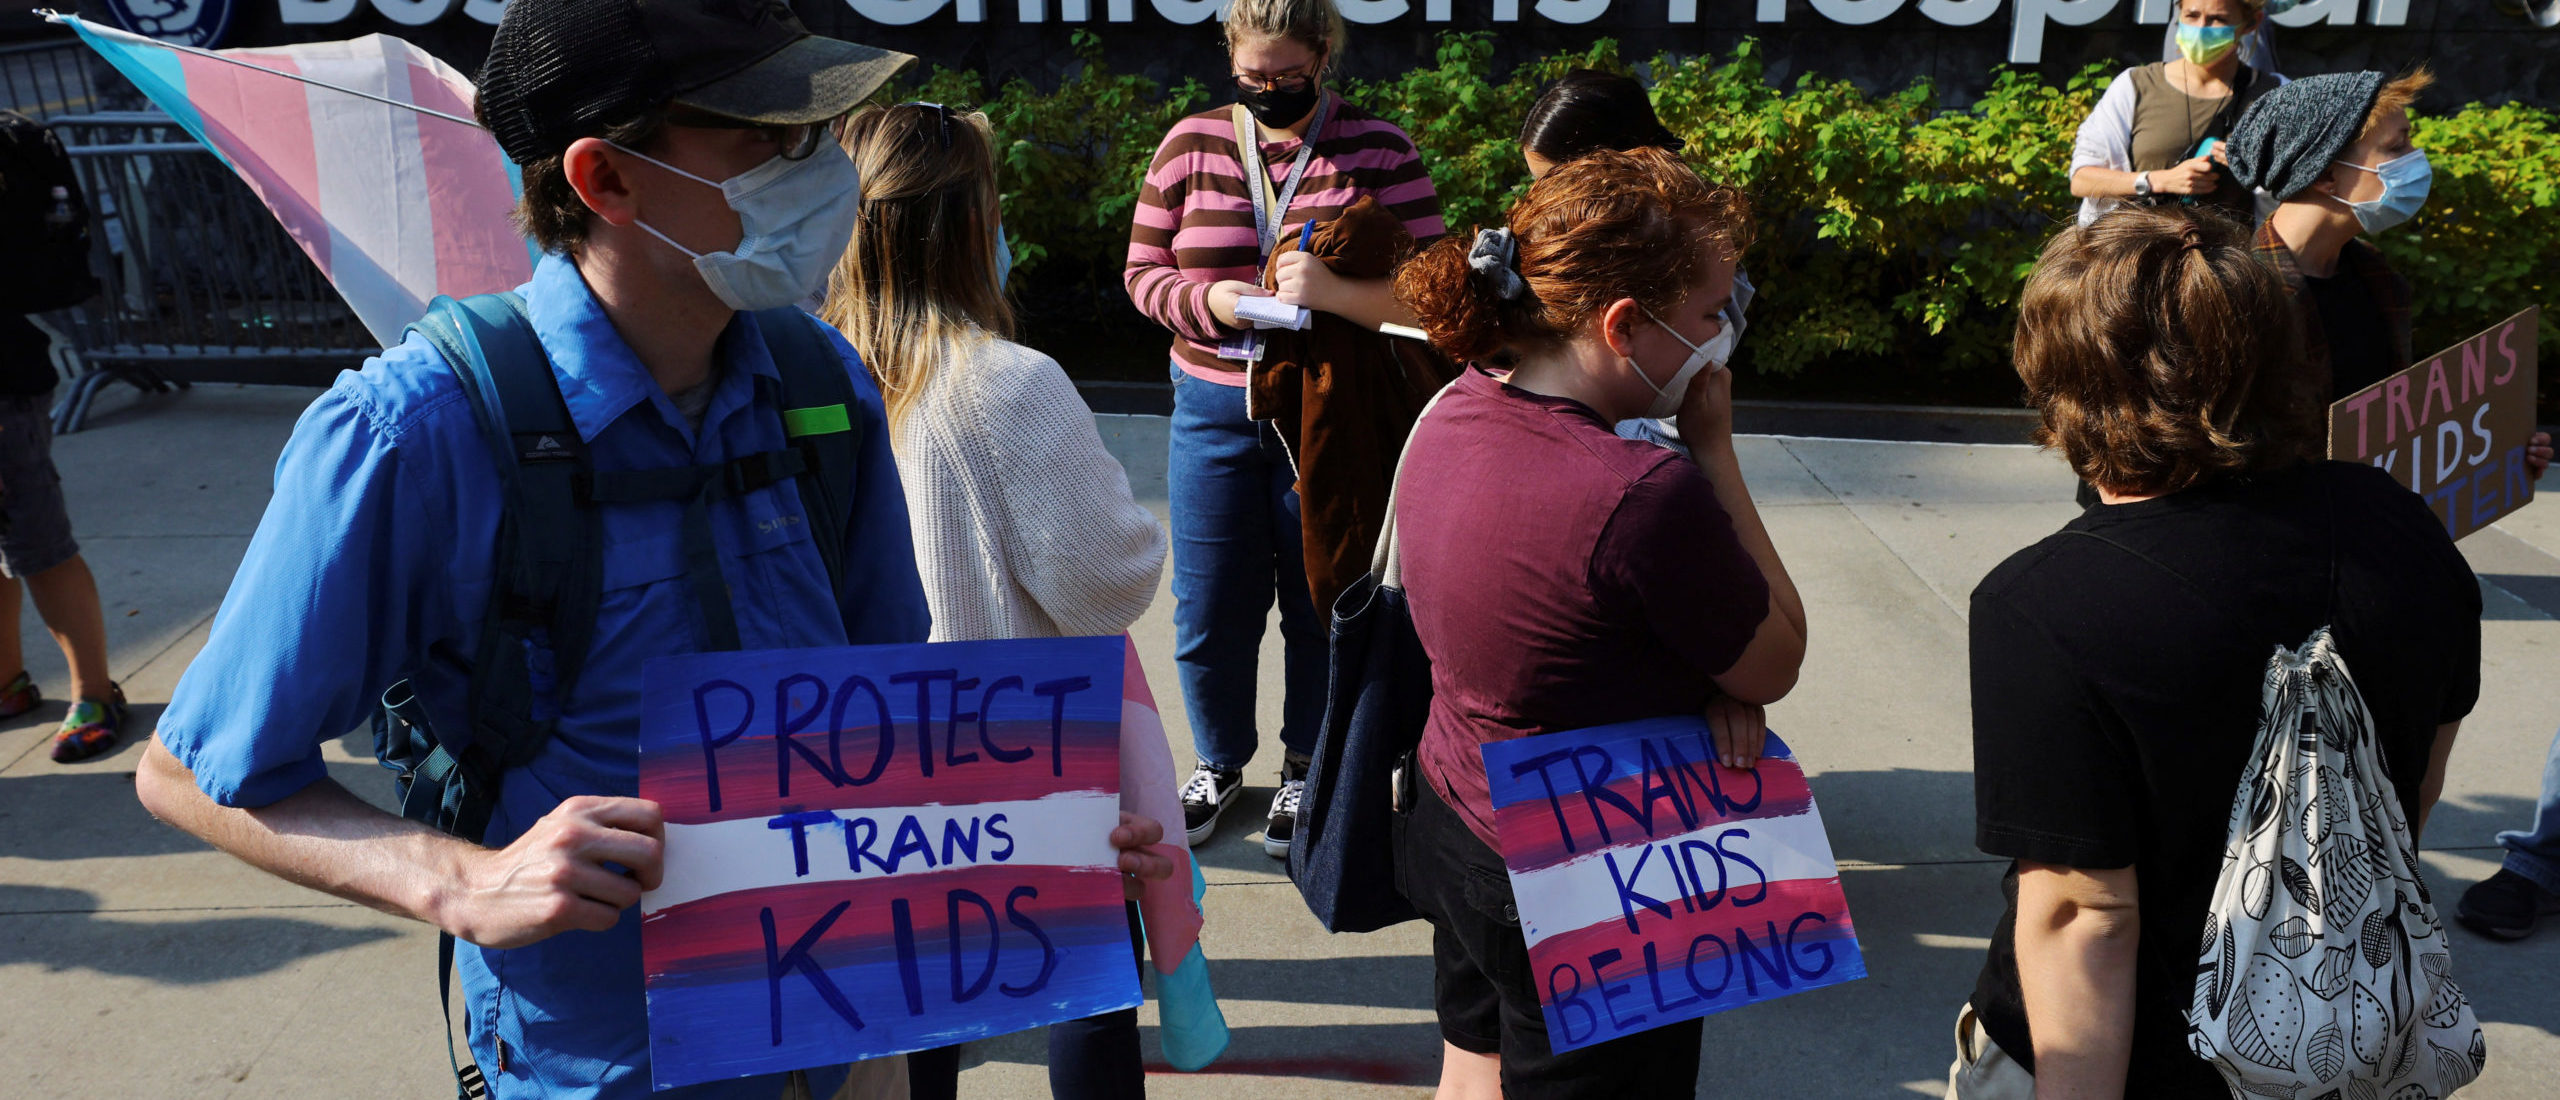 Counter-protestors gather to demonstrate against an appearance by "Billboard Chris", who opposes medical treatments for transgender youth, outside Children's Hospital in Boston, Massachusetts, U.S., September 18, 2022.